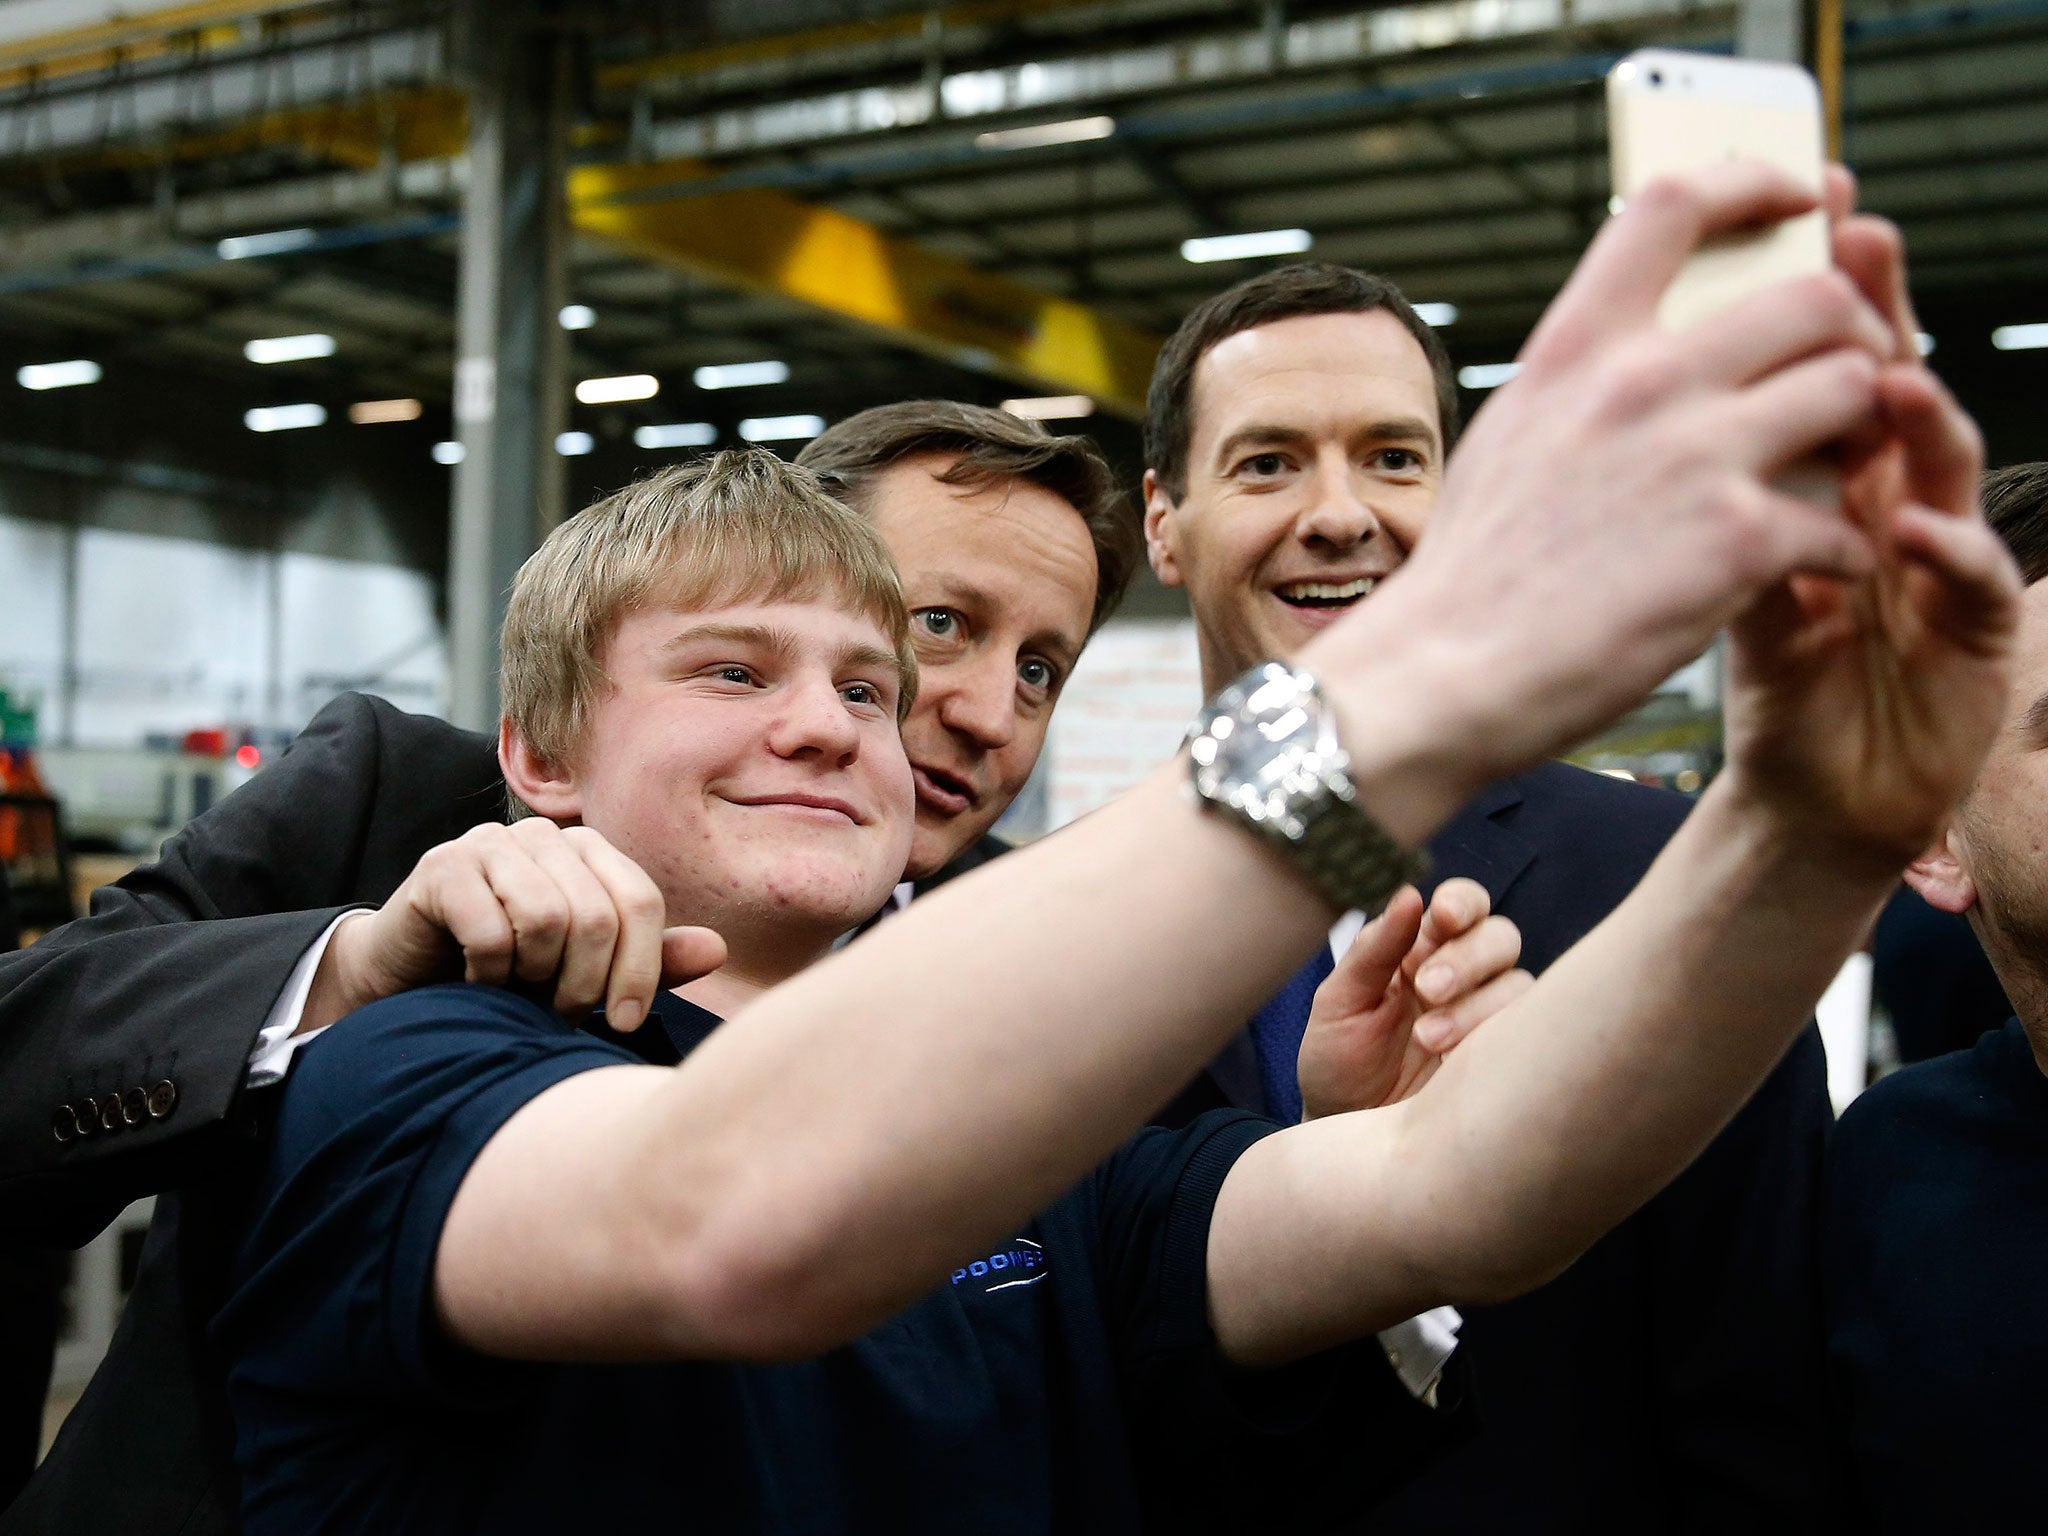 Prime Minister David Cameron and Chancellor of the Exchequer George Osborne pose for a selfie photograph with an apprentice during a visit to the Spooner engineering works in Ilkley